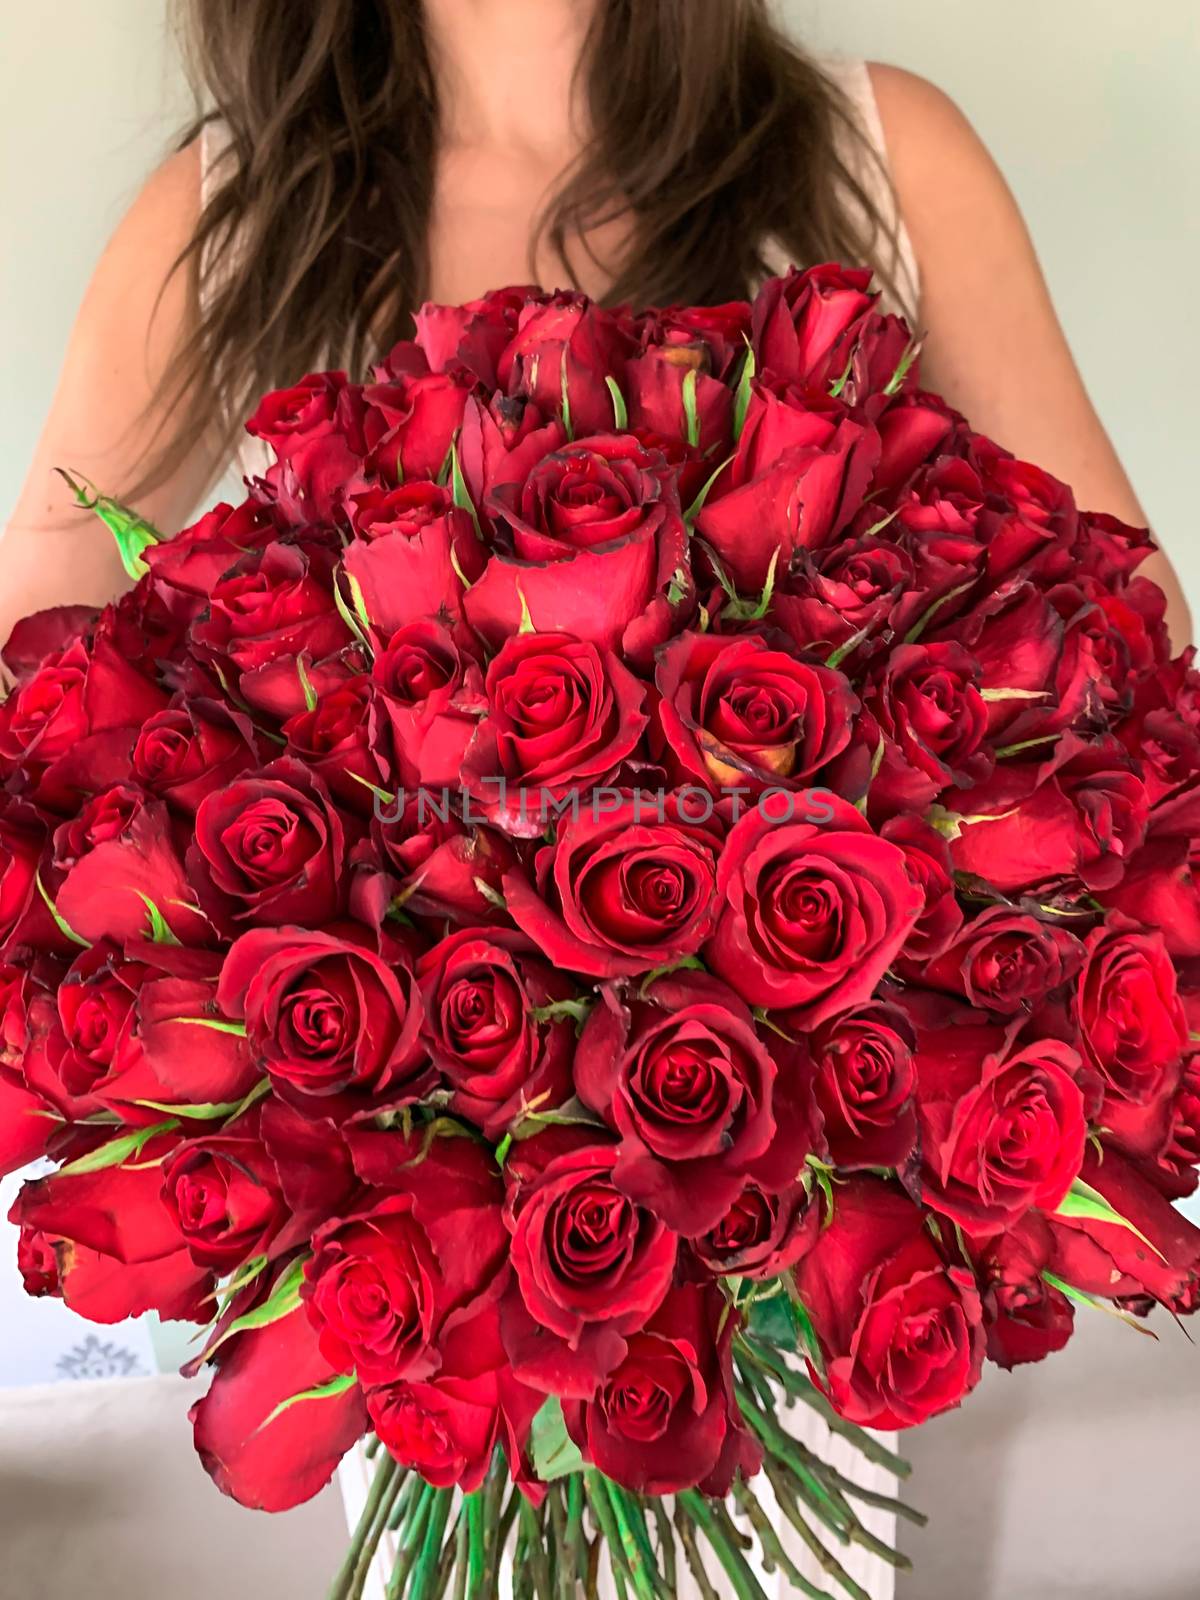 A young girl holding in hands a huge bouquet of 101 wonderful red roses. Front view